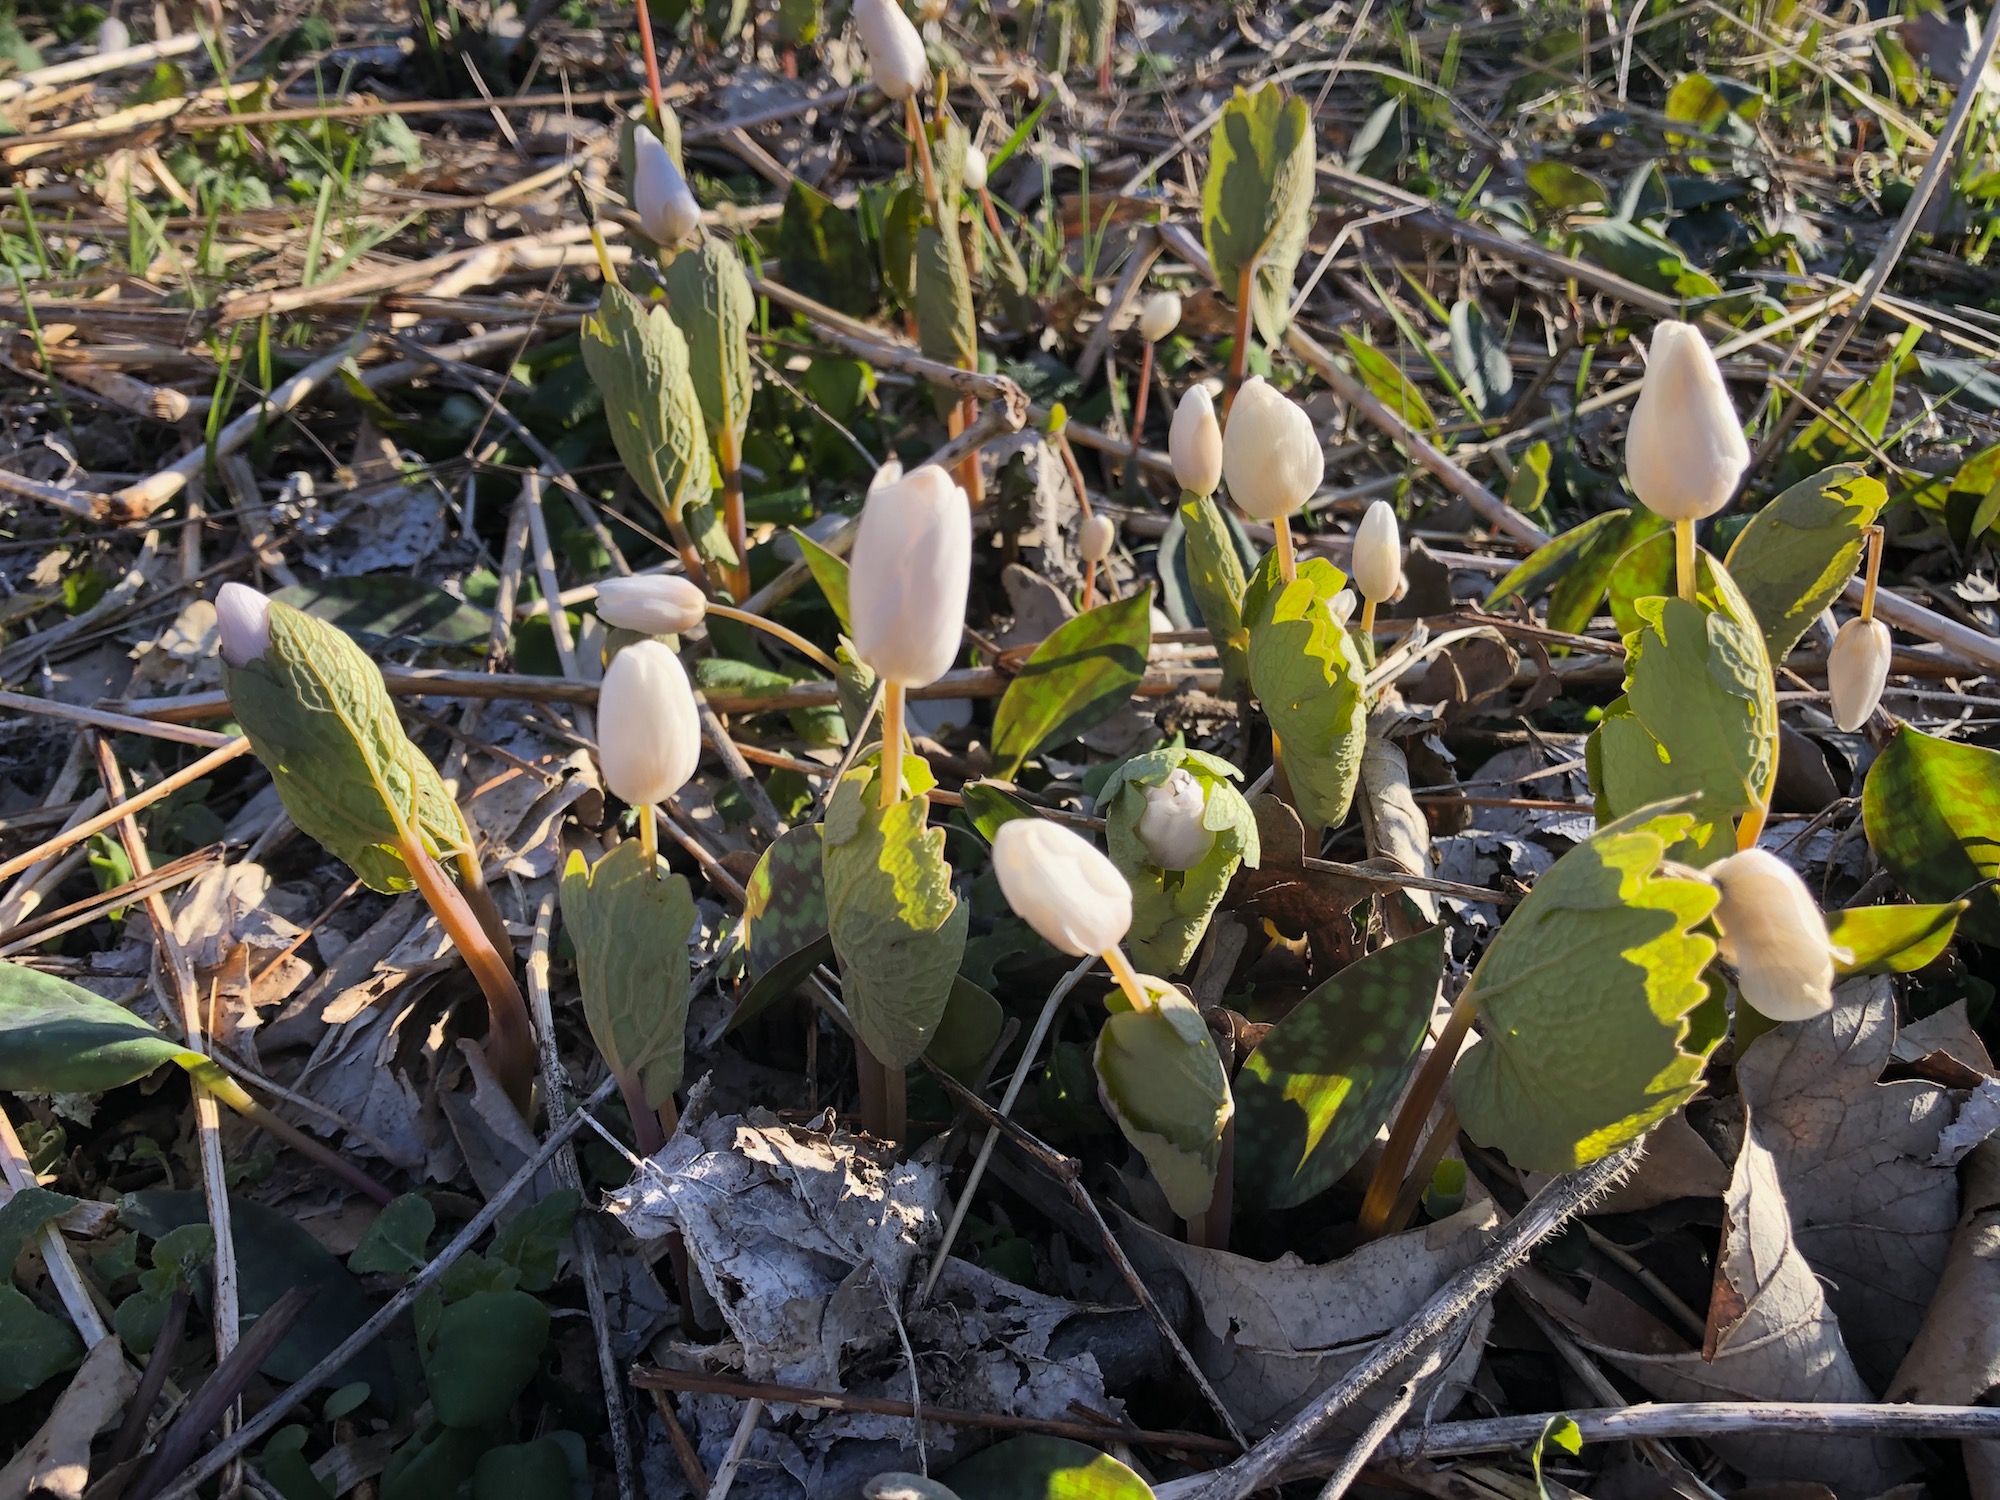 Bloodroot in Oak Savanna by Council Ring in Madison, Wisconsin on April 16, 2020.